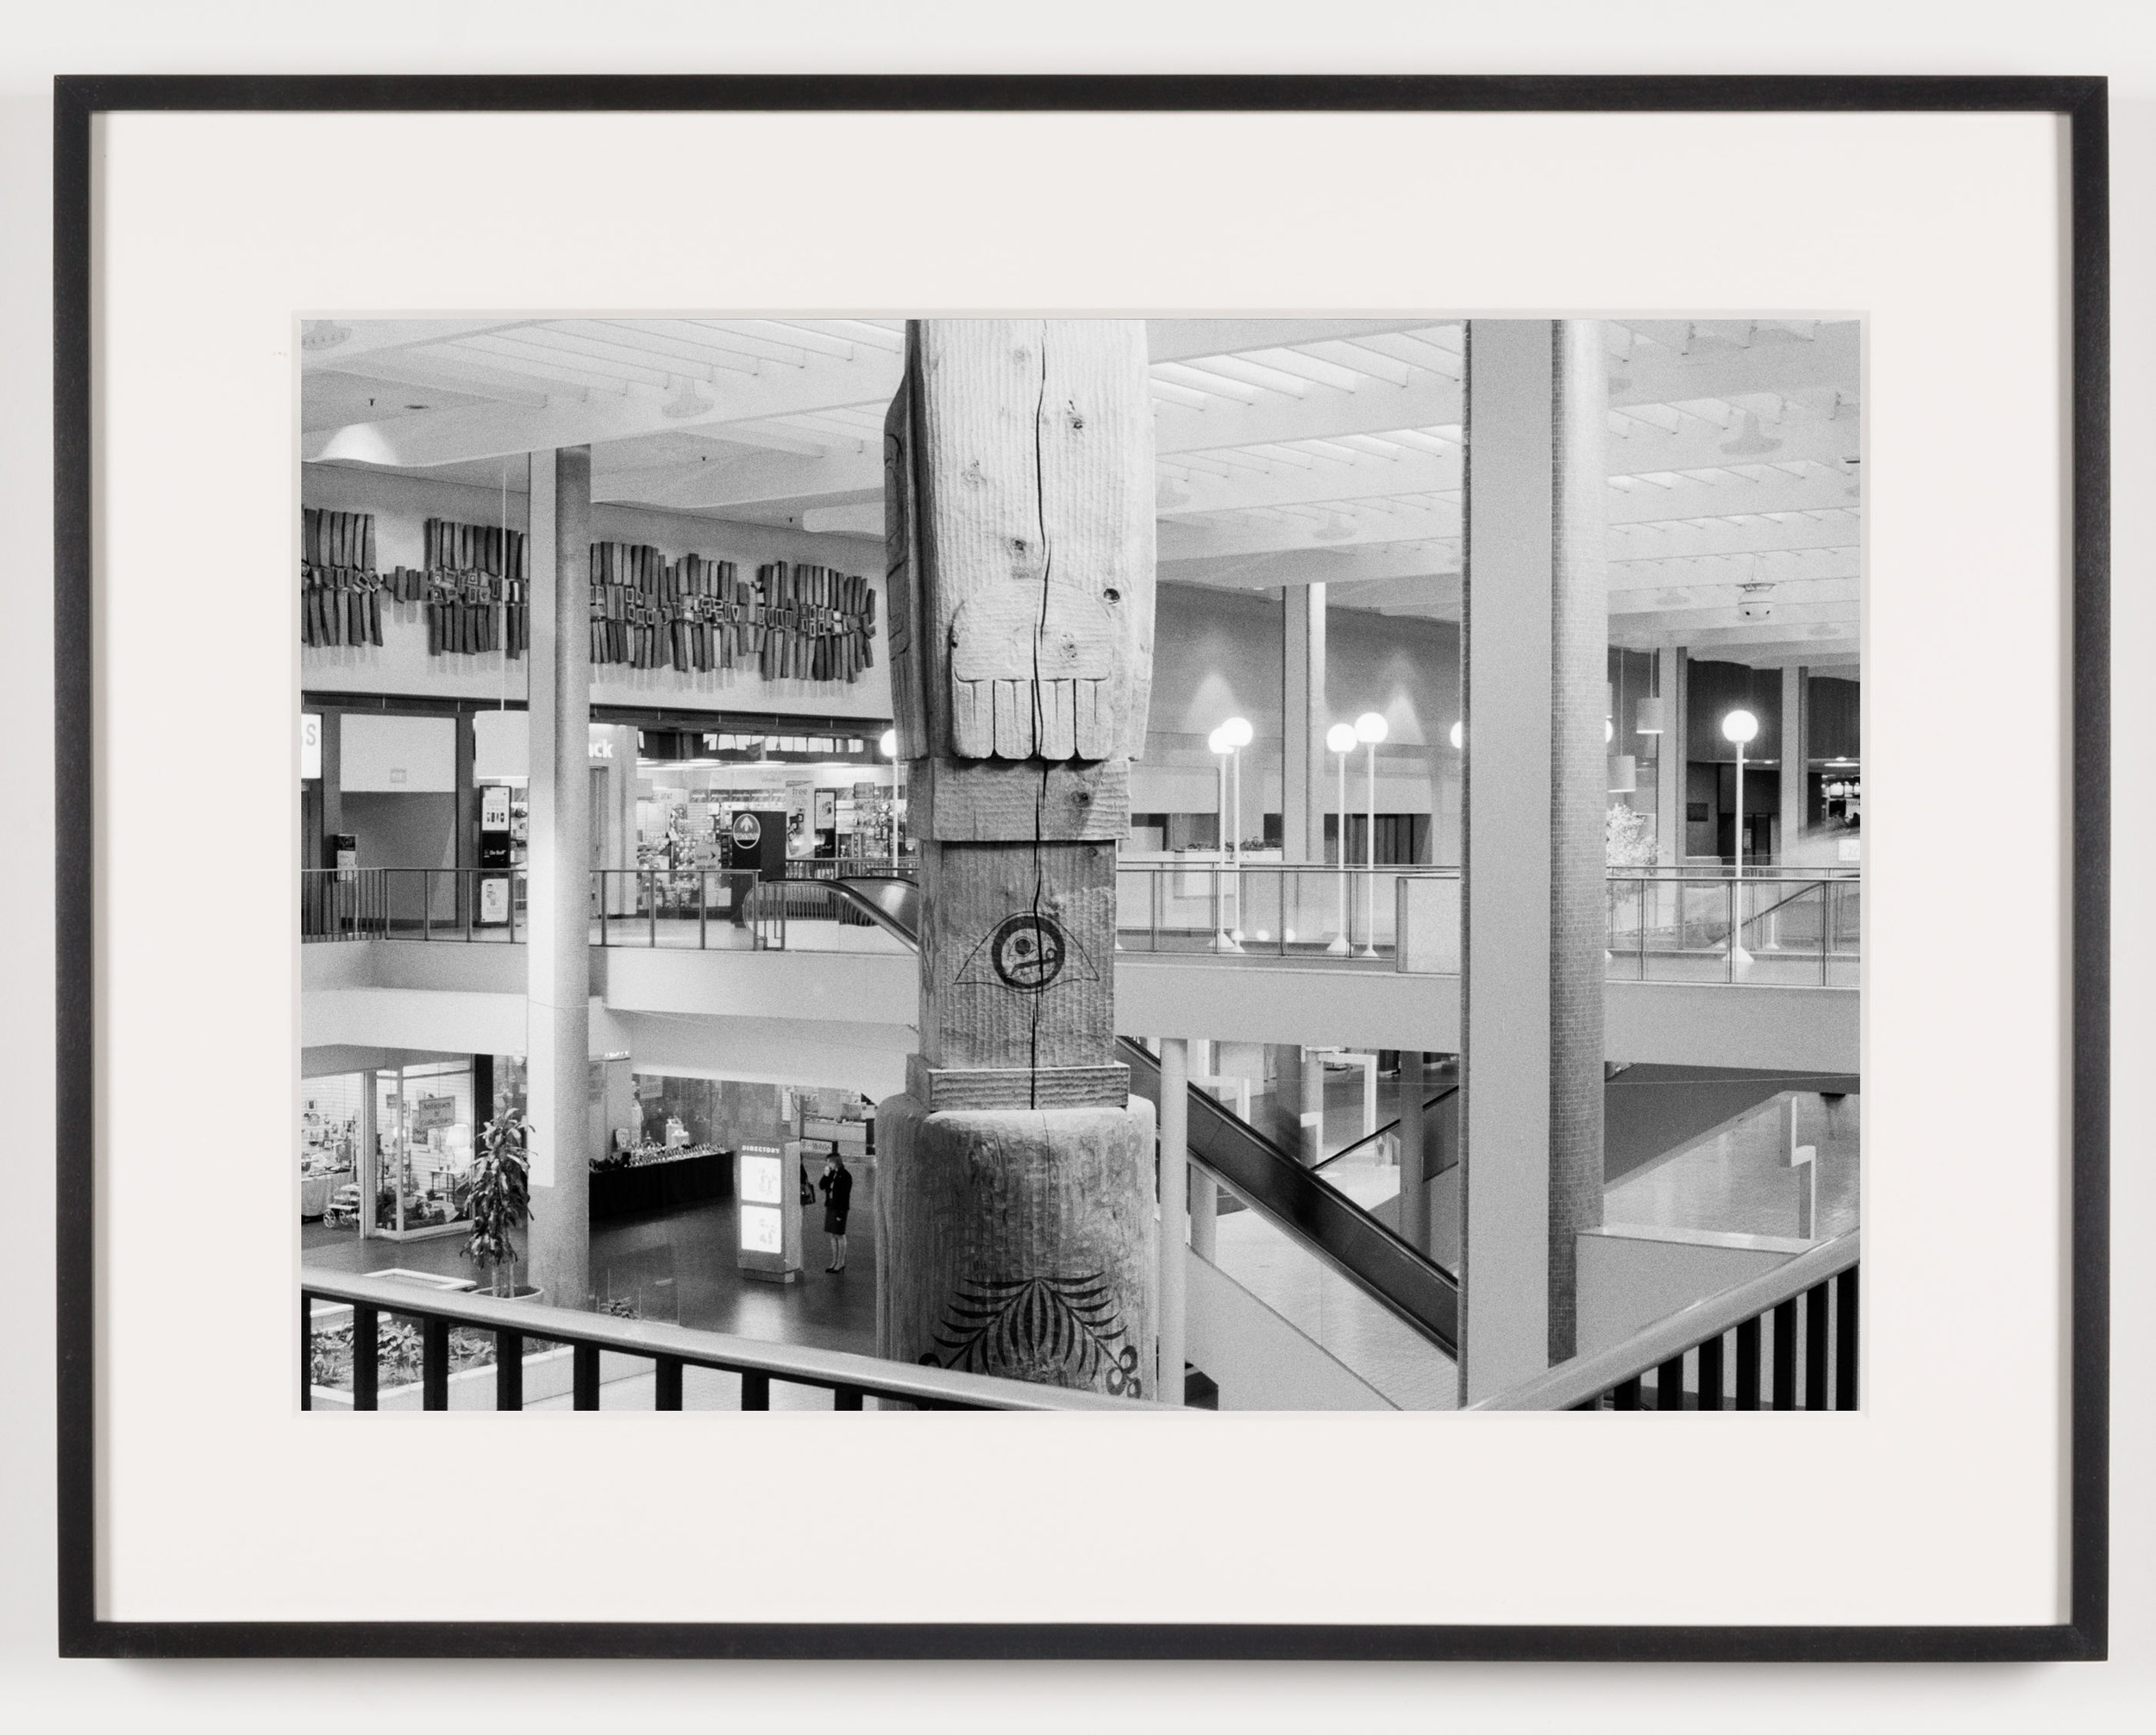   Midtown Plaza (View of Totem Pole, Back), Rochester, NY, Est. 1962, Demo. 2010   2011  Epson Ultrachrome K3 archival ink jet print on Hahnemühle Photo Rag paper  21 5/8 x 28 1/8 inches   American Passages, 2001–2011    A Diagram of Forces, 2011    